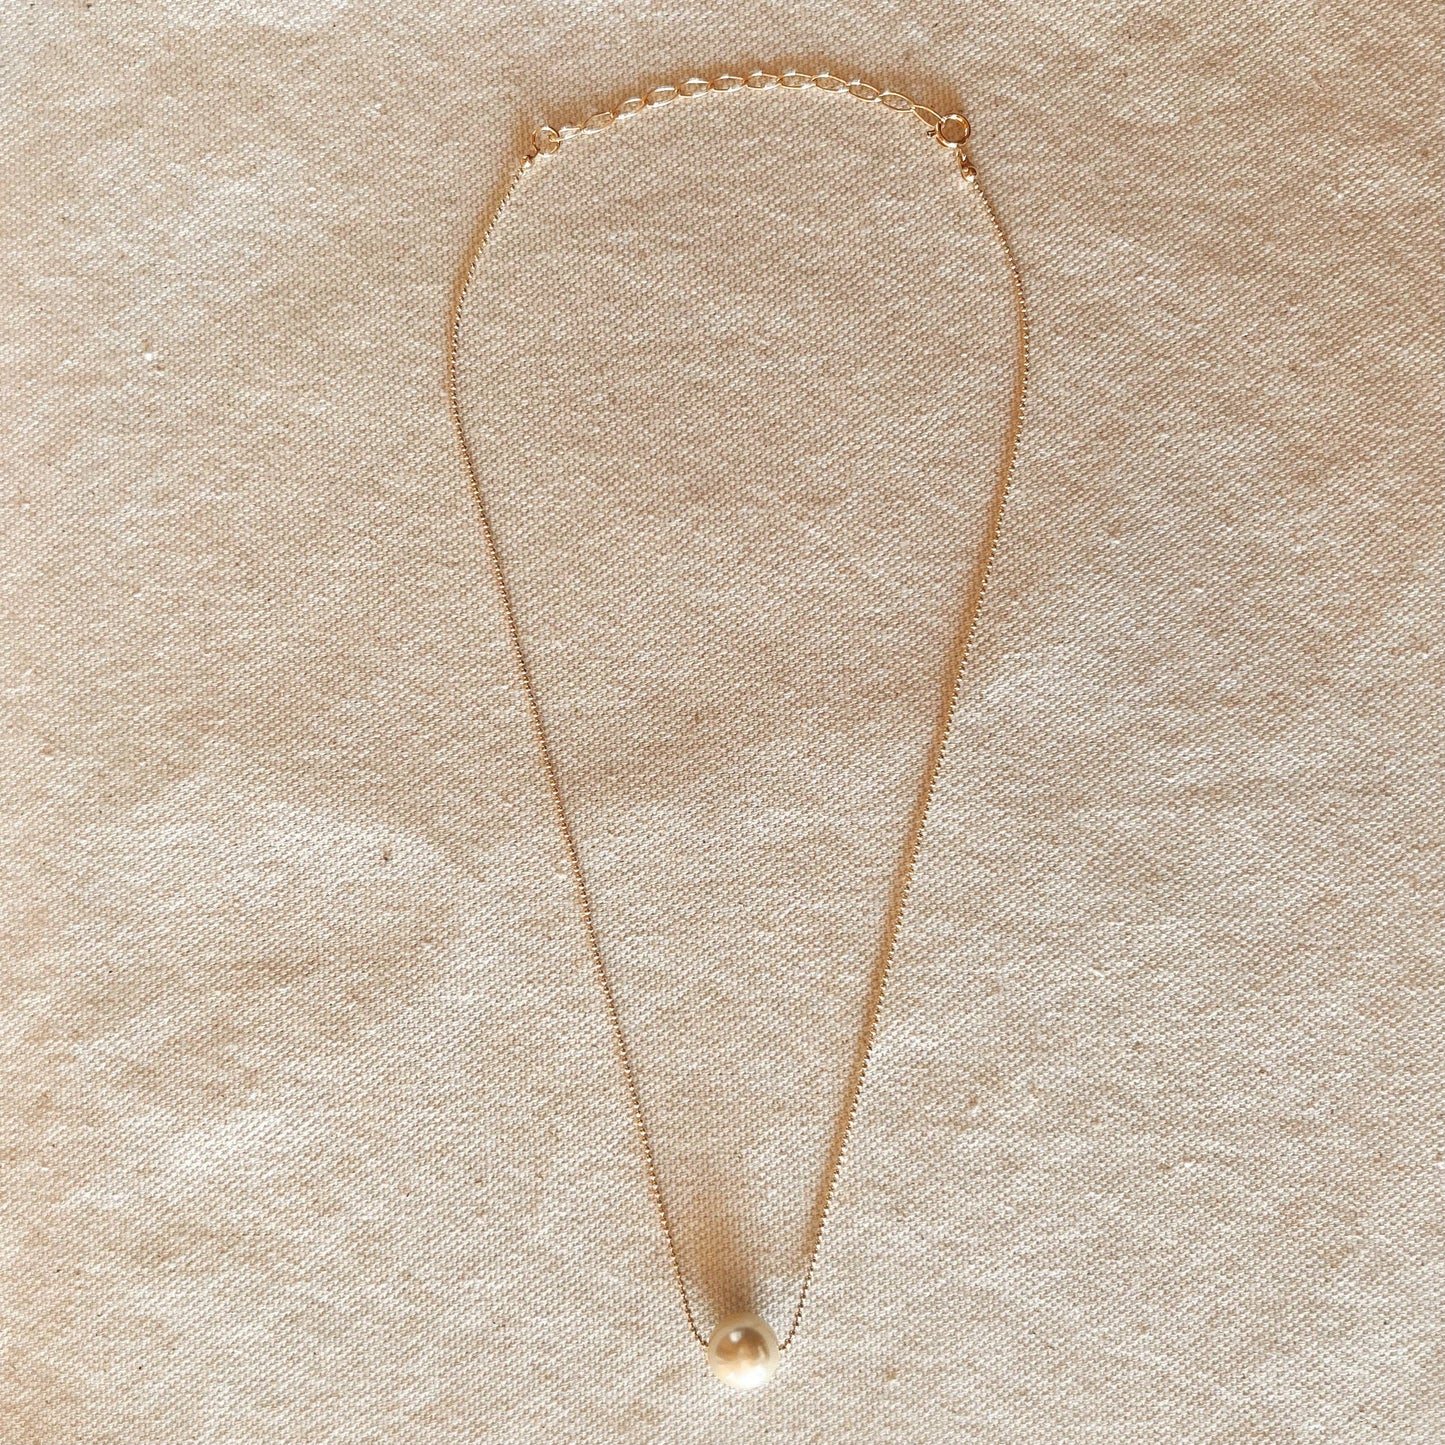 18k Gold Filled Solitaire Pearl Necklace - The Crowd Went Wild